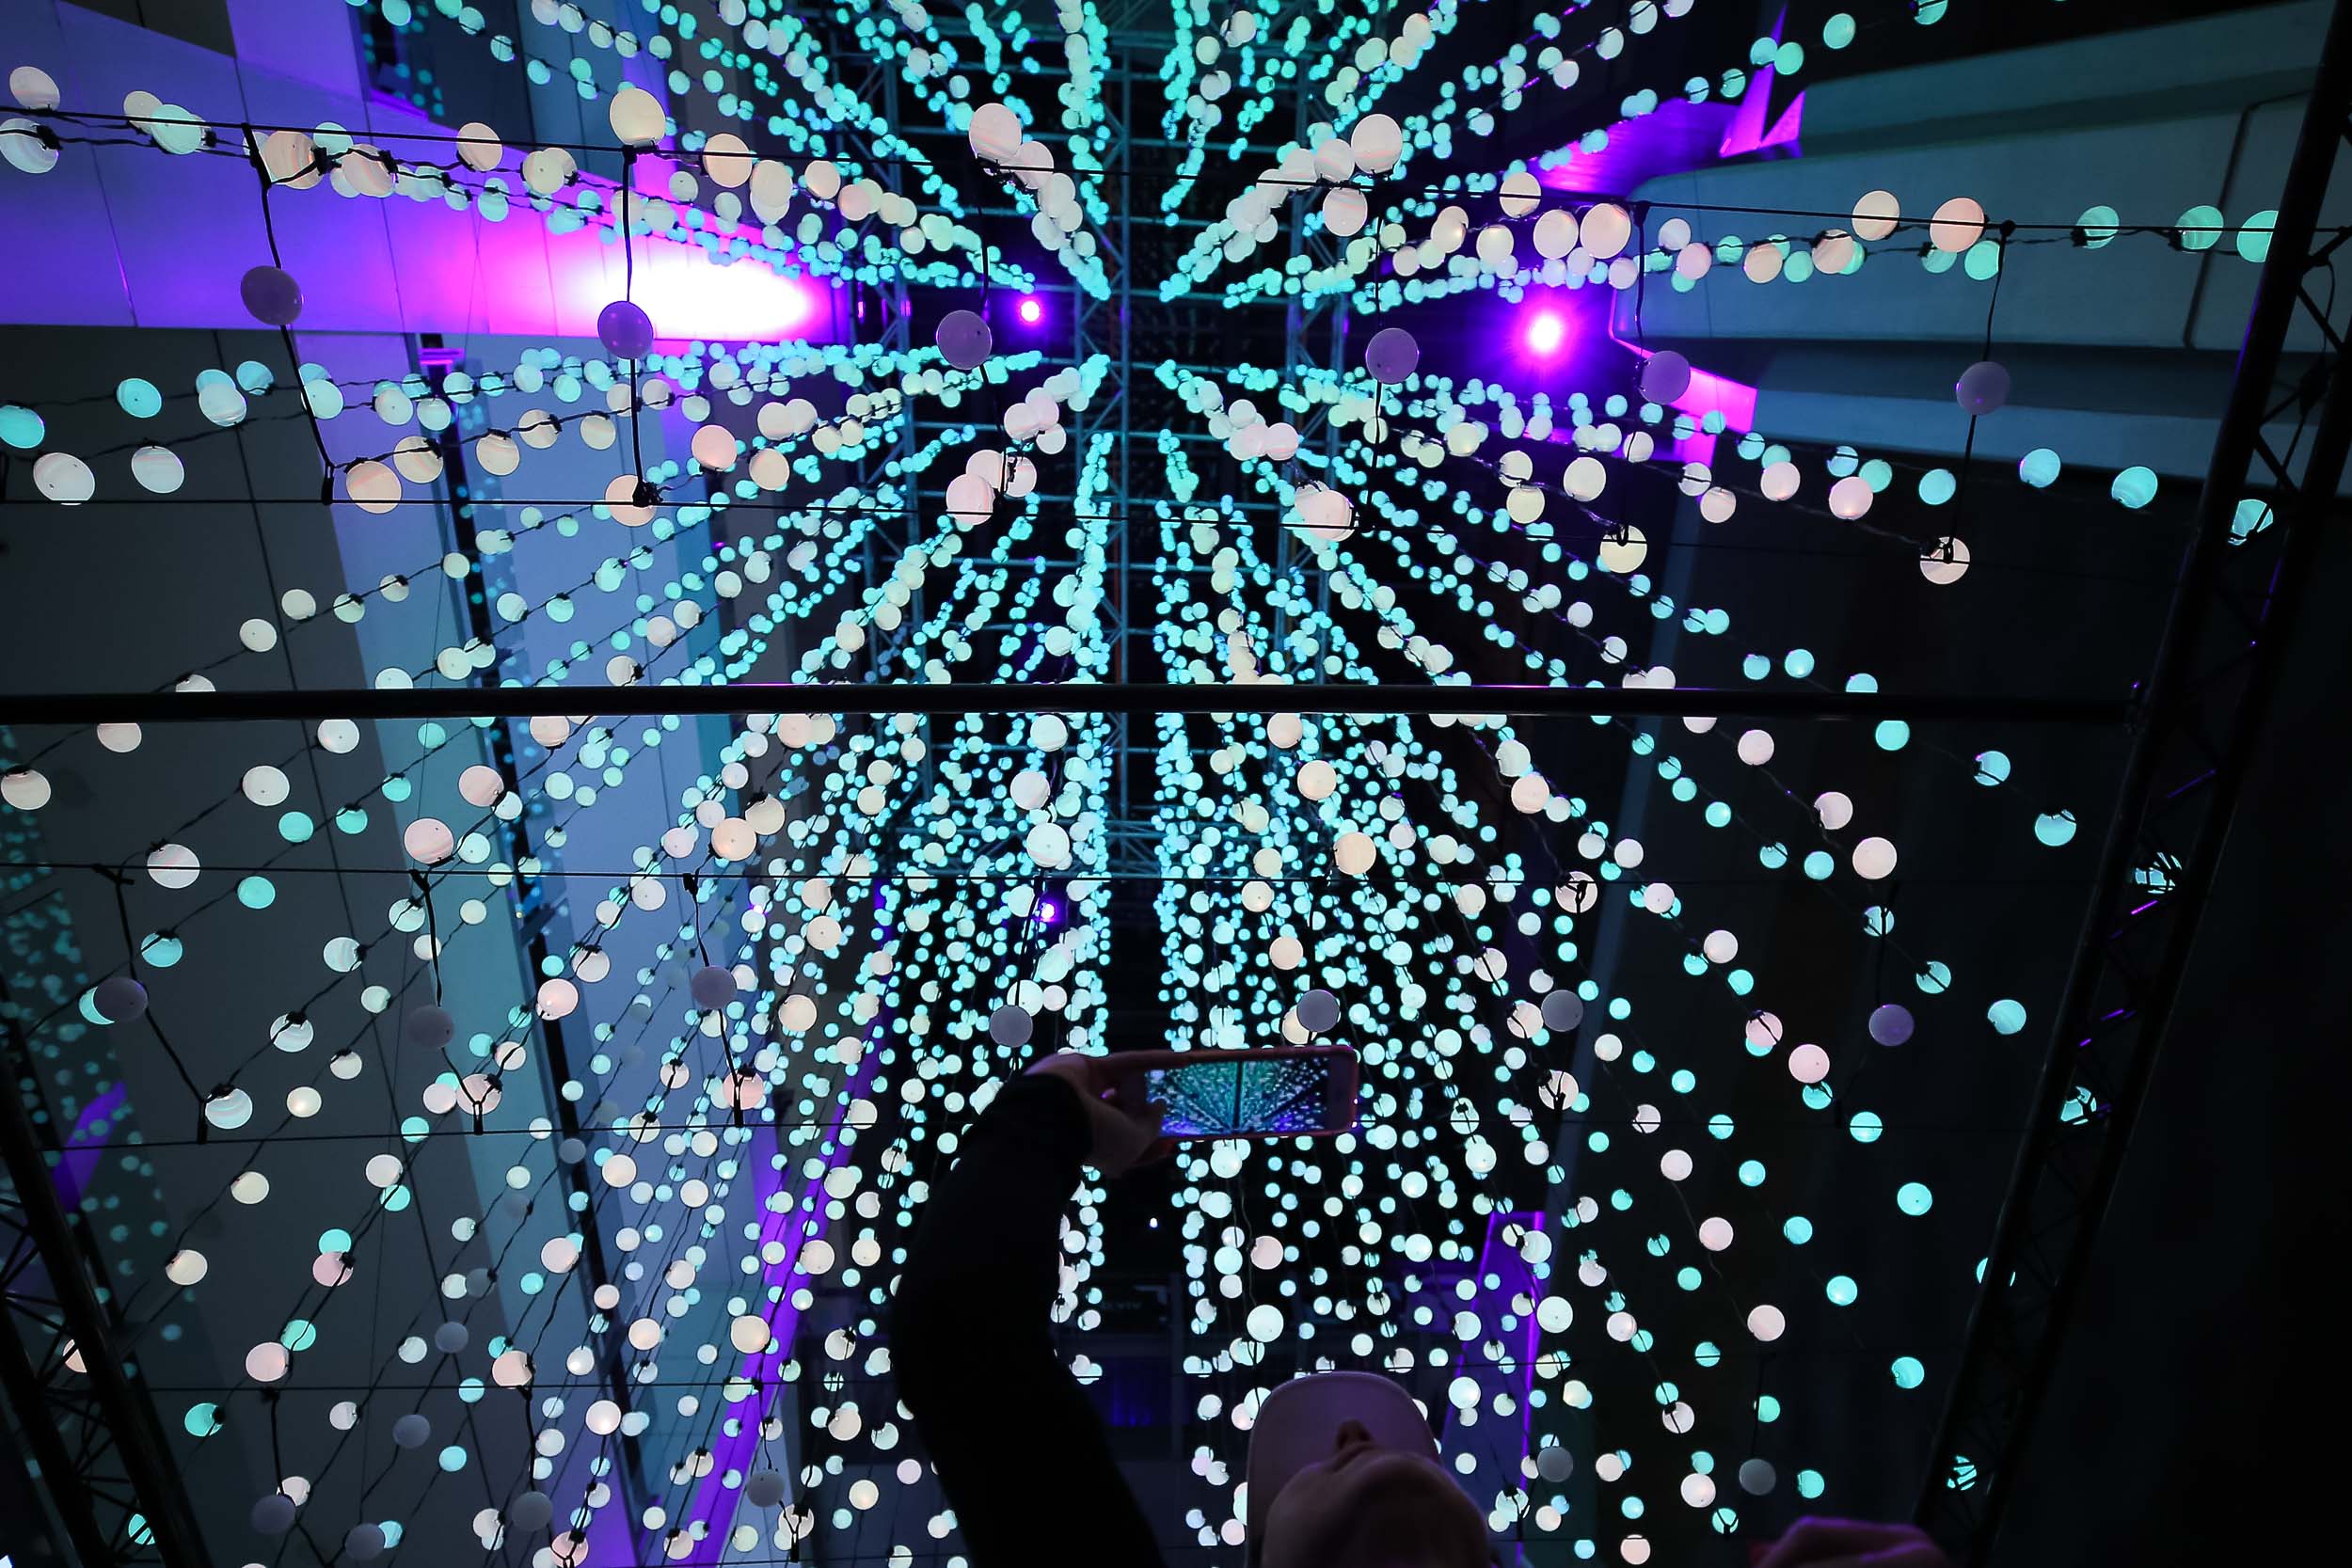  9000 illuminated spheres can be seen during a preview of Chatswood Interchanges’s Voxelscape installation by large scale architectural projection artists, The Electric Canvas, which is part of Vivid Sydney festival of light and sound beginning on Ma